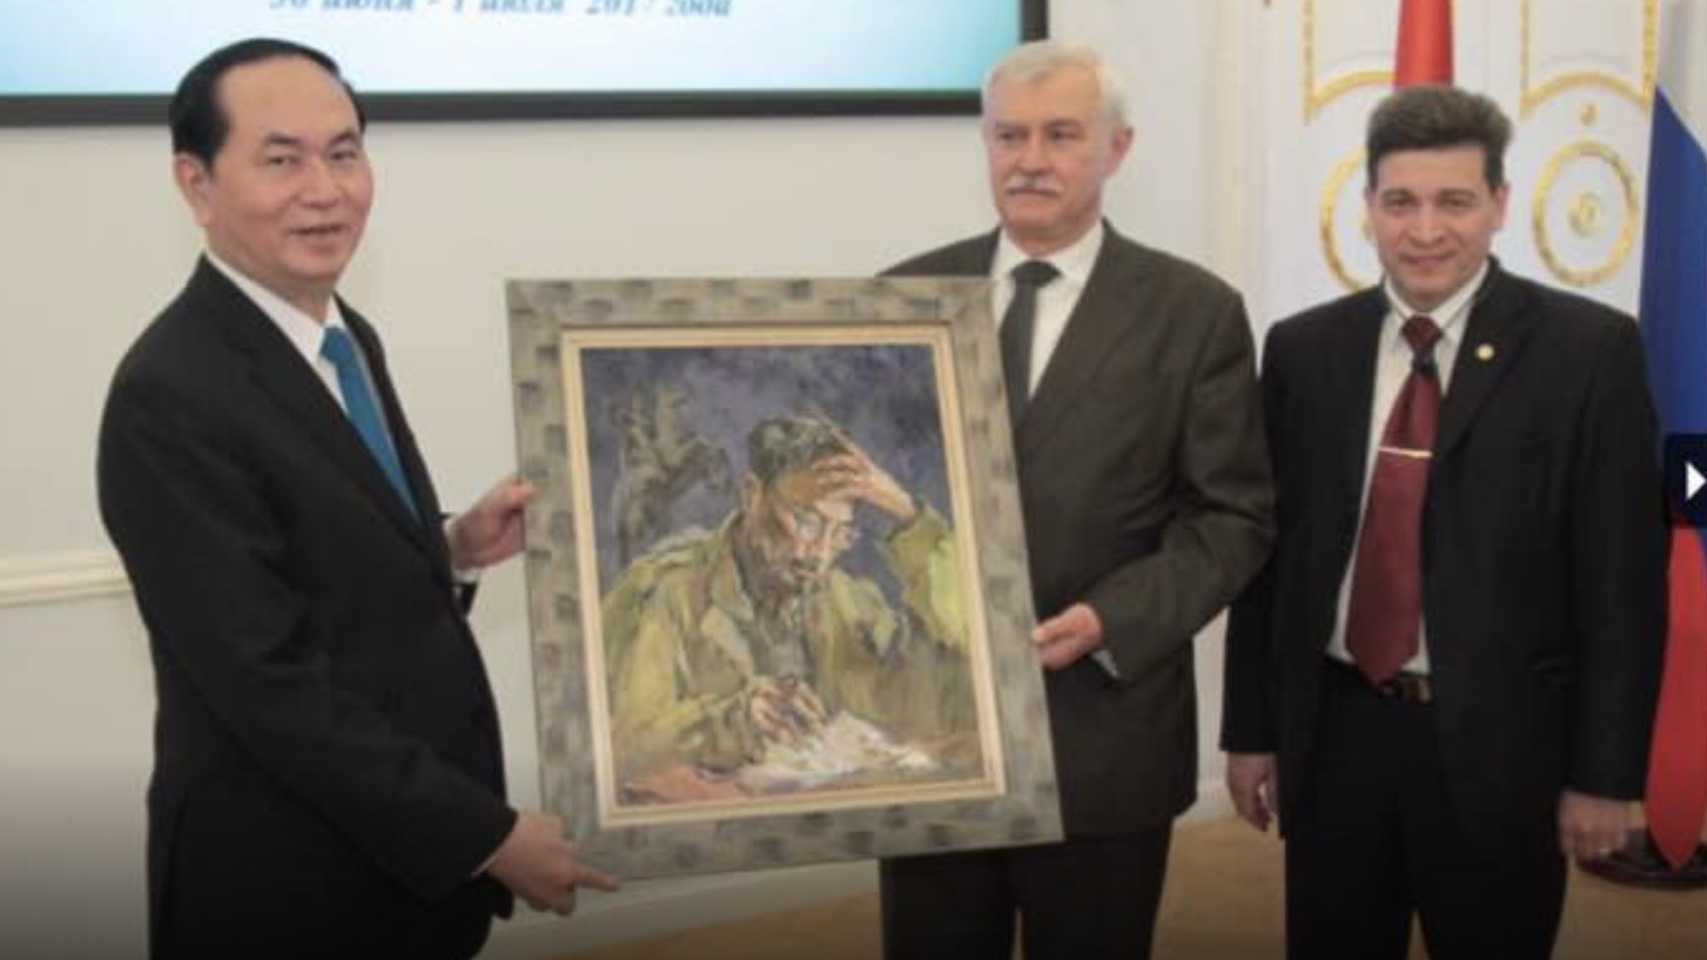 A portrait of late Vietnamese President Ho Chi Minh painted by Tuman Zhumabaev is presented as a gift to Vietnam’s then-incumbent State President Tran Dai Quang (left) by Russian government representatives in this photo captured in 2017 and provided by Lilac gallery.